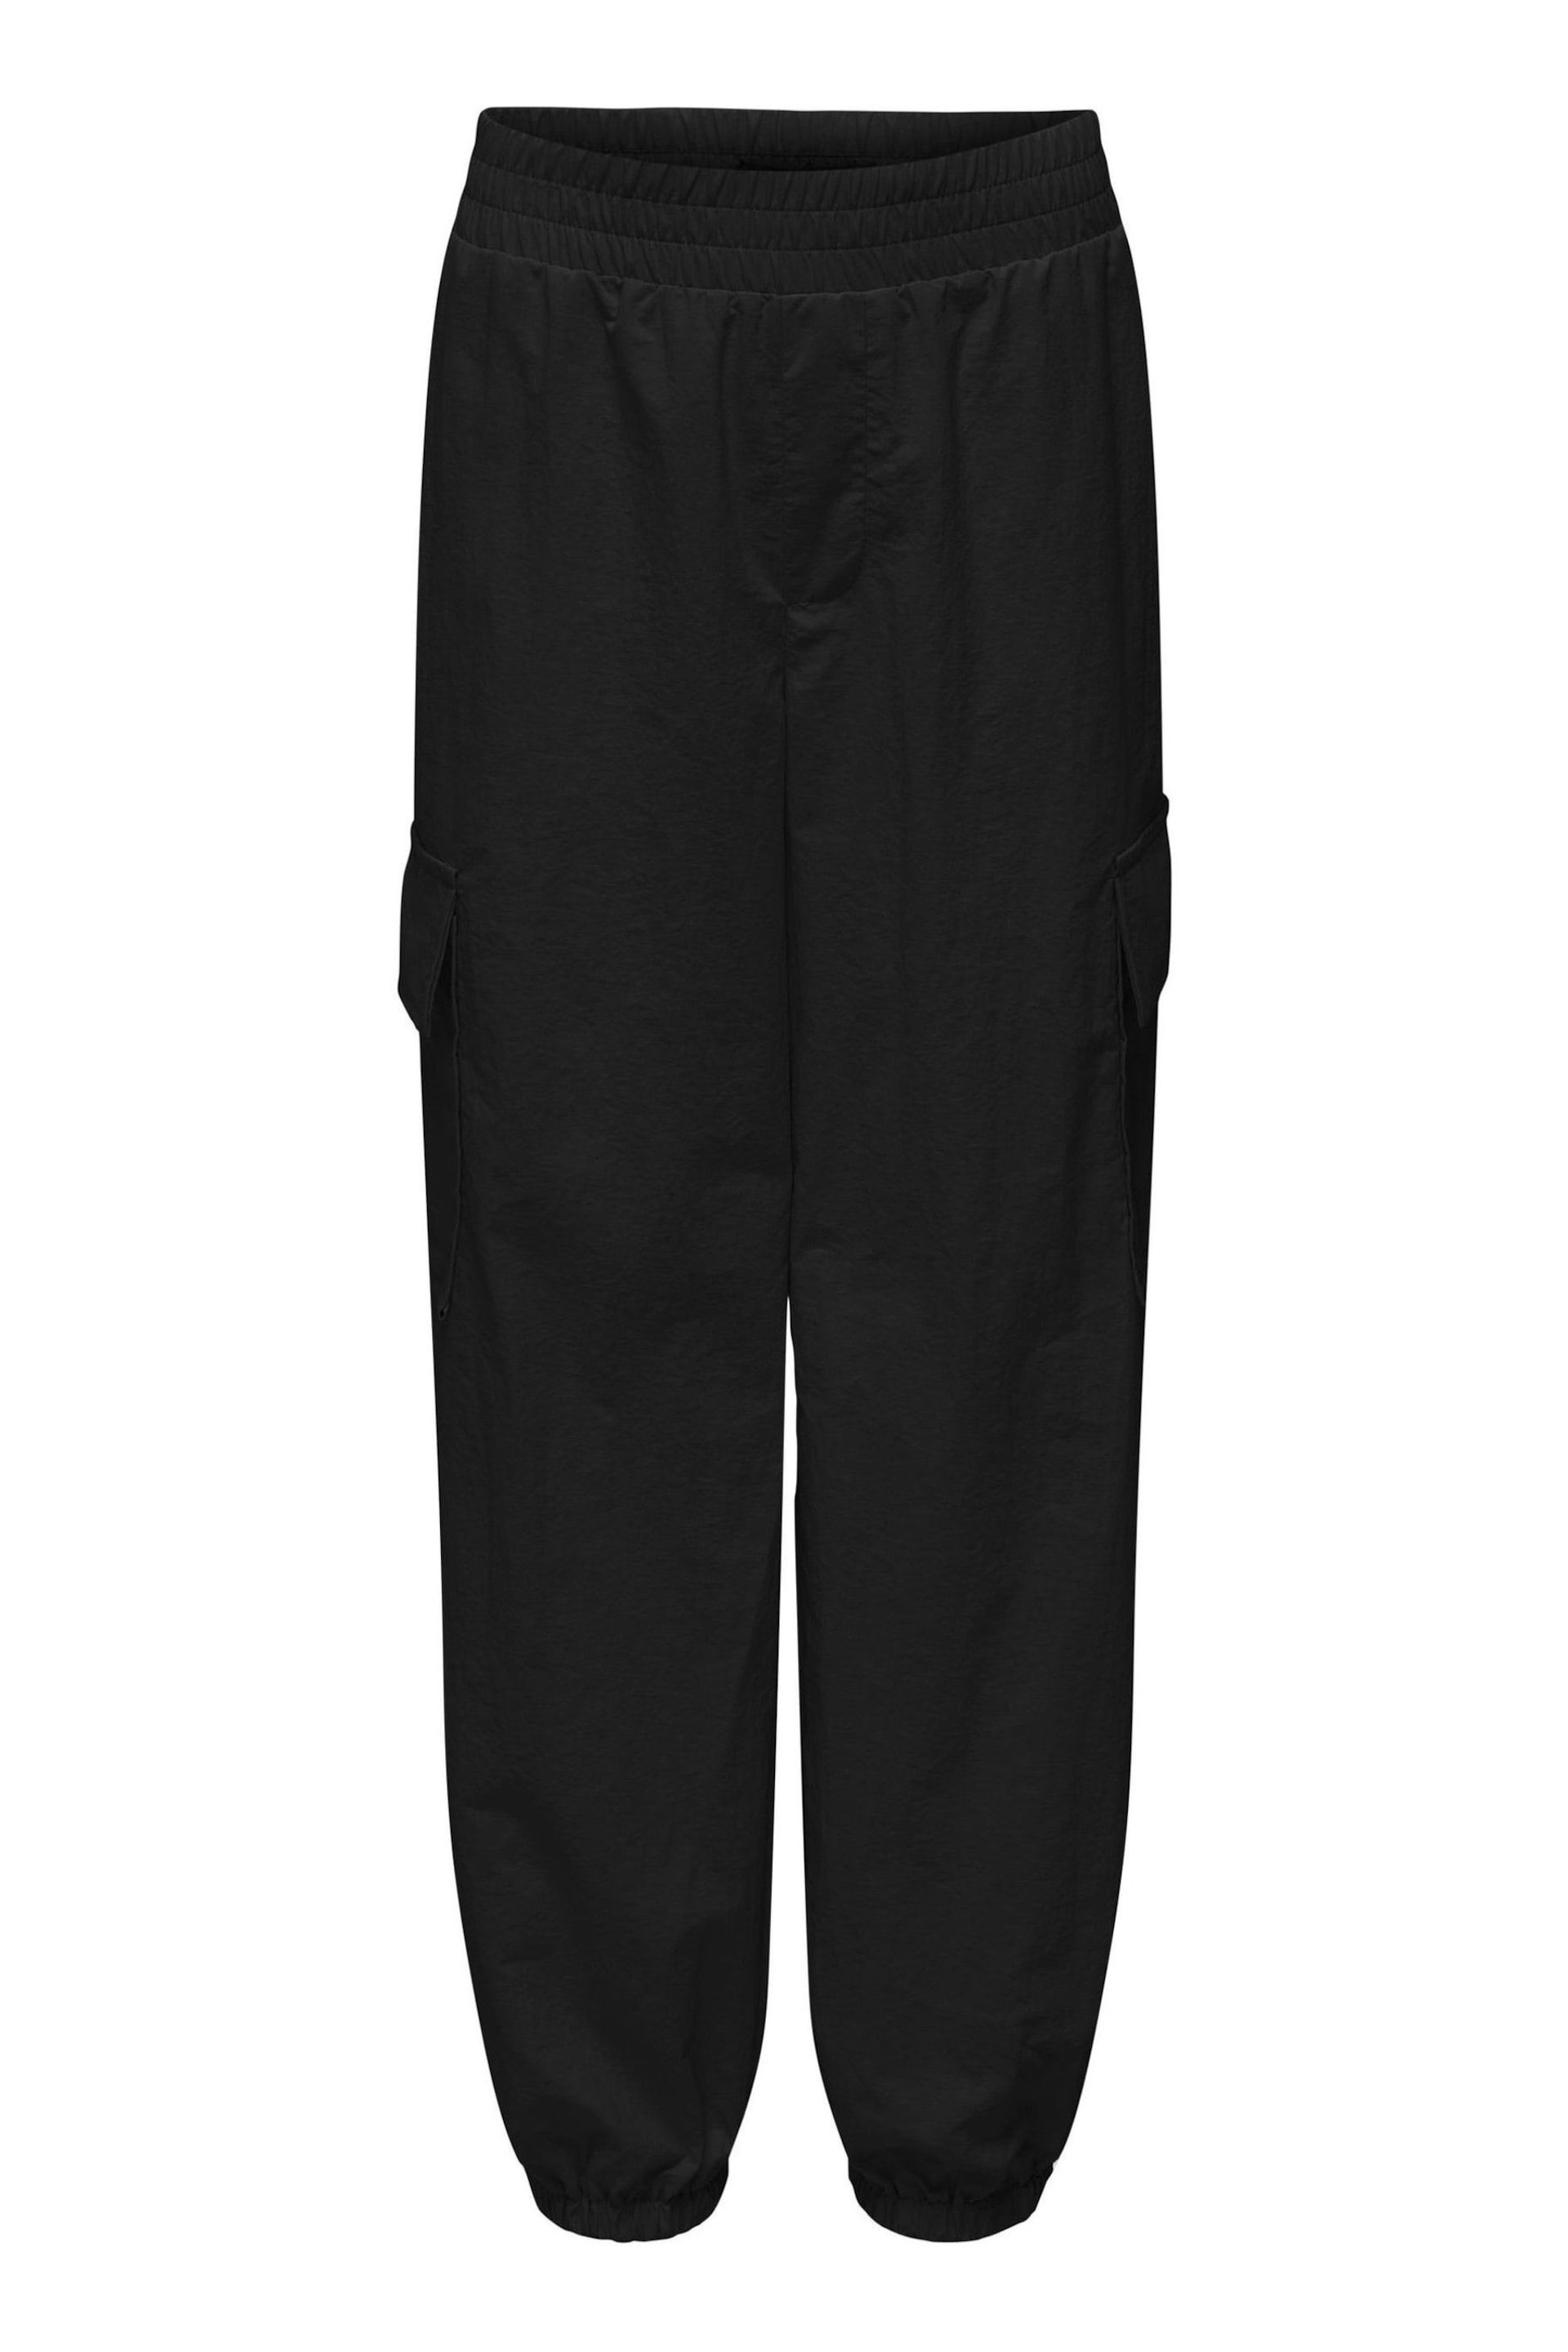 ONLY KIDS Parachute Cargo Black Trousers - Image 1 of 2